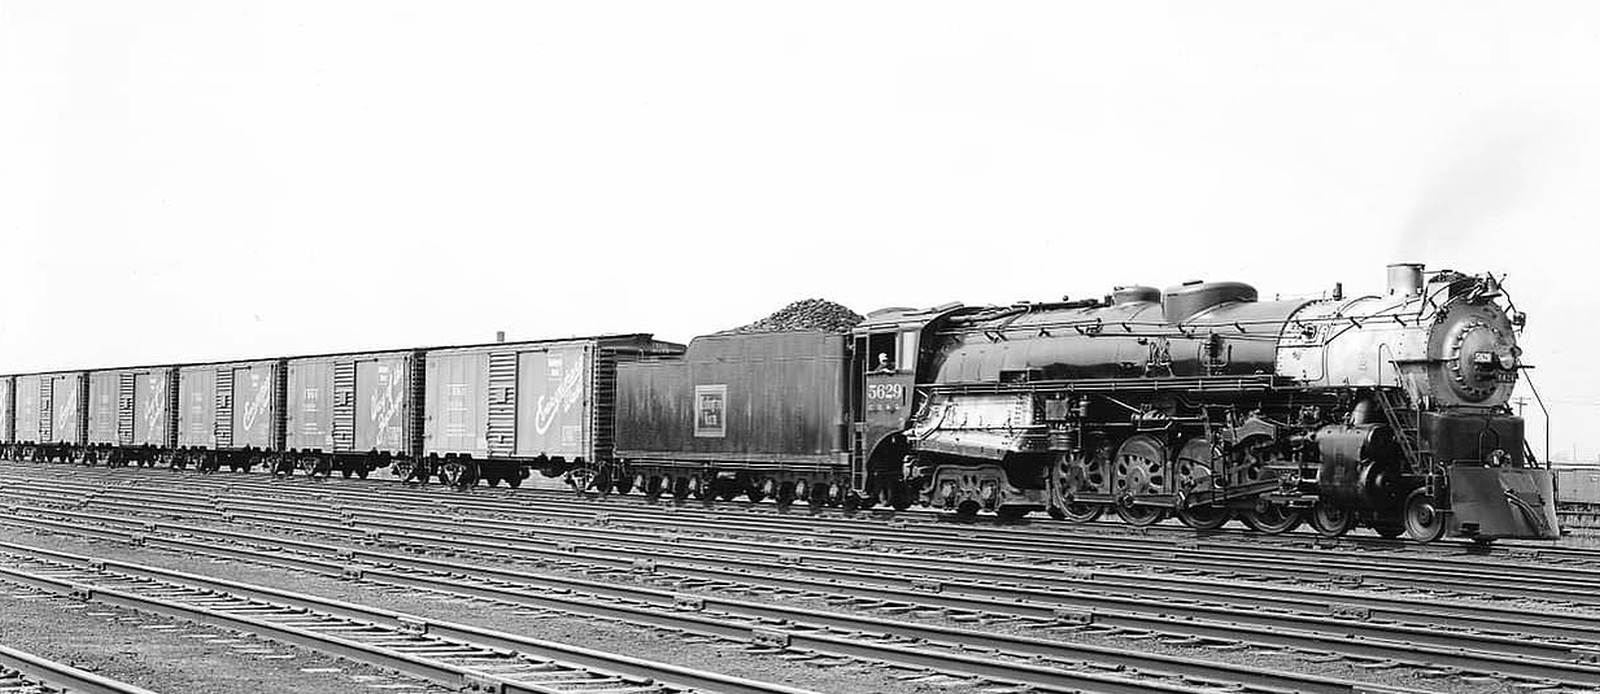 O-5a No. 5629 in April 1941 with a freight train near Chicago